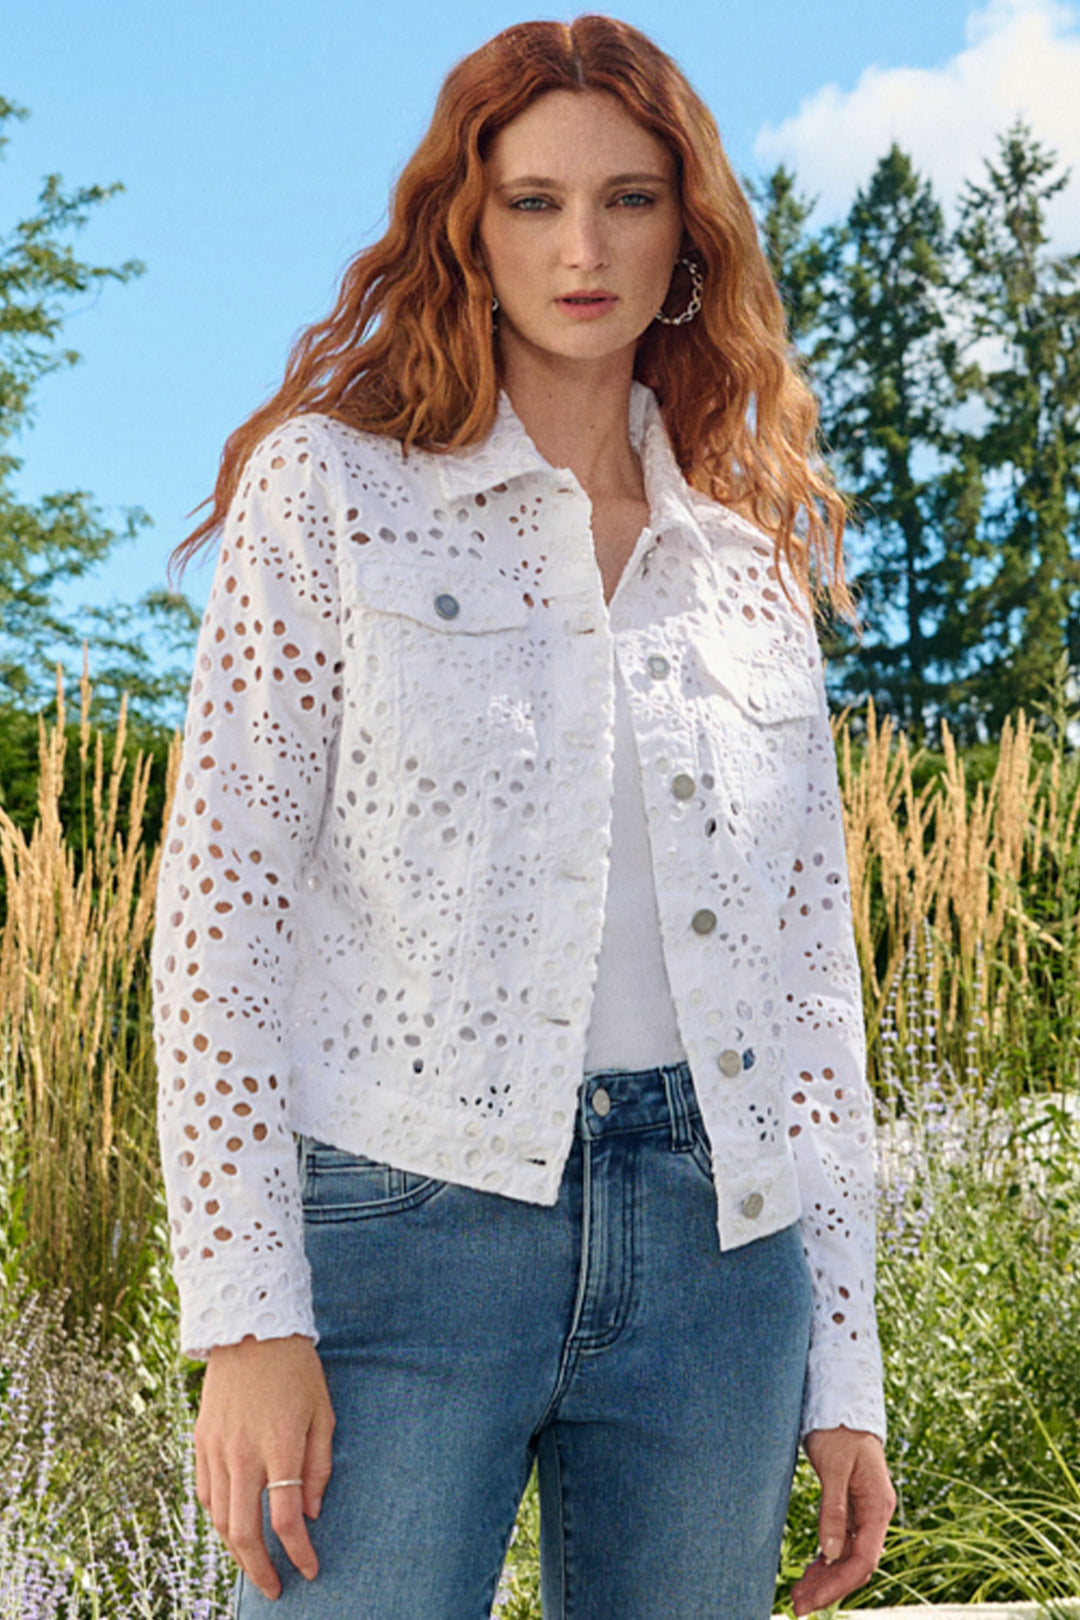 The pierced eylet pattern adds a unique touch and the classic collar and full length sleeves provide a timeless look.